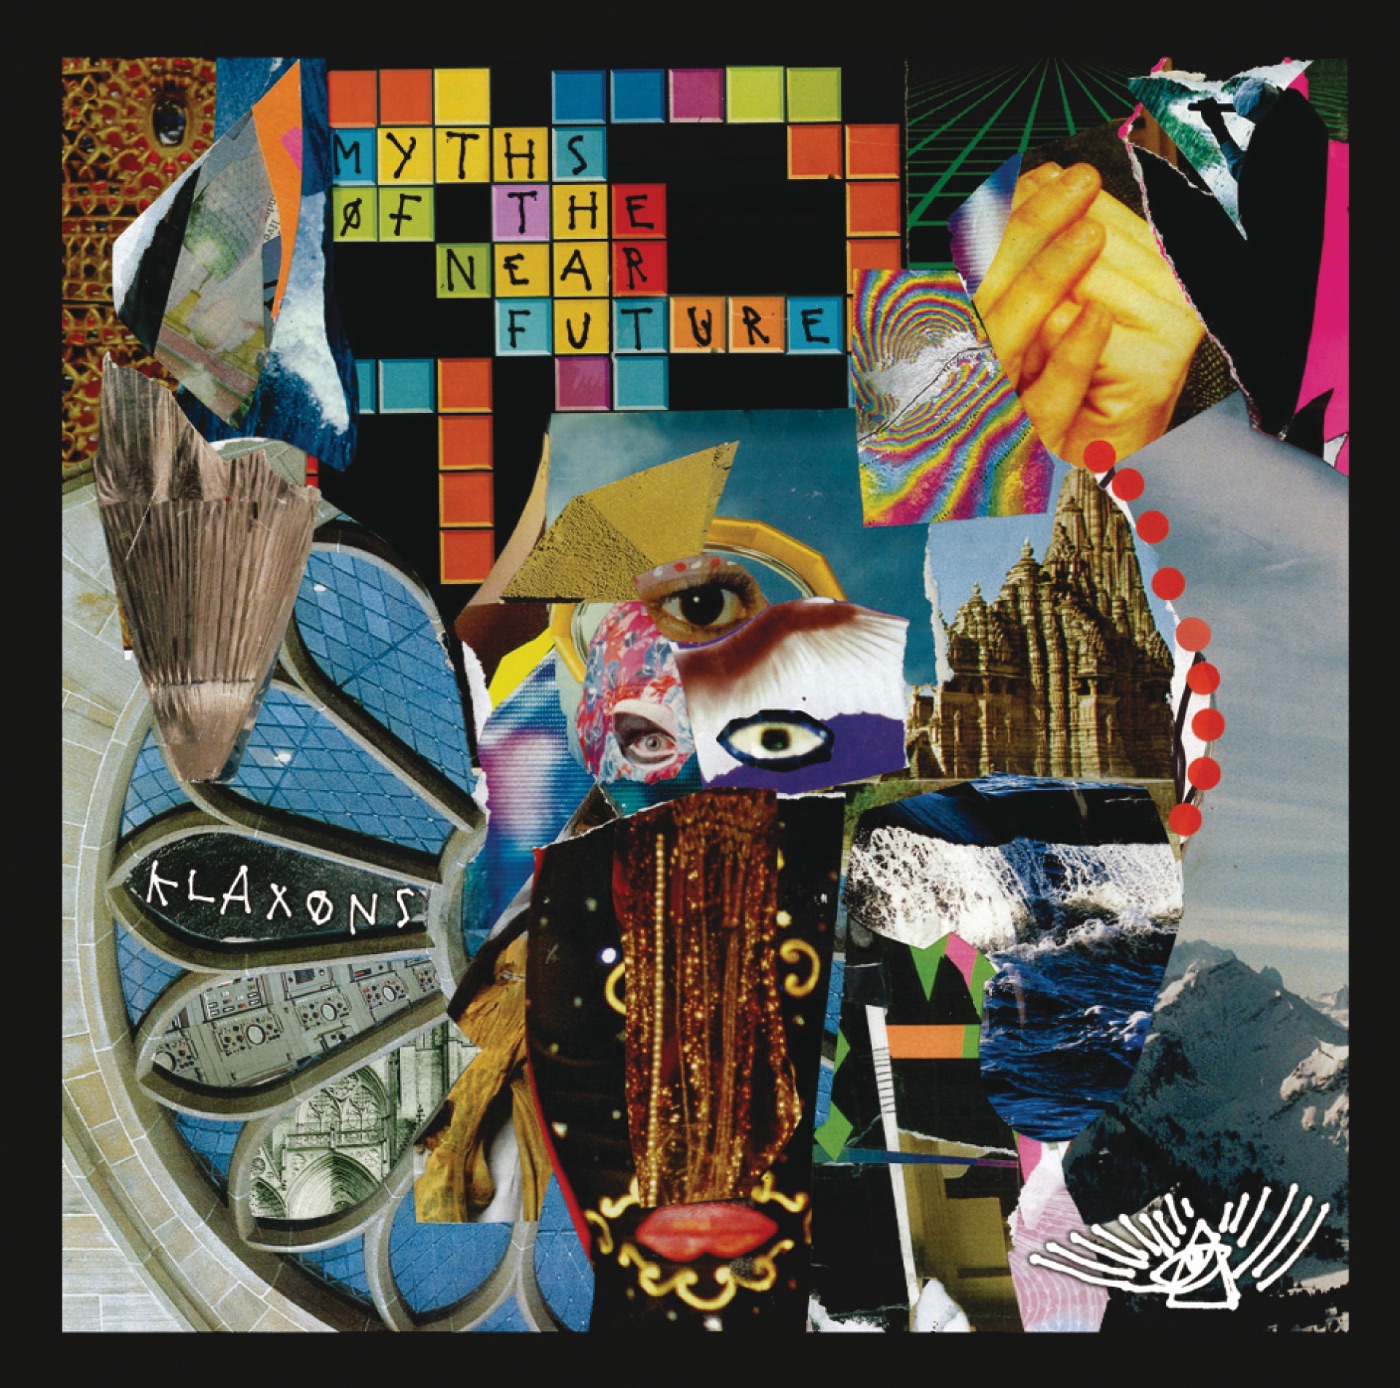 Myths Of The Near Future by Klaxons